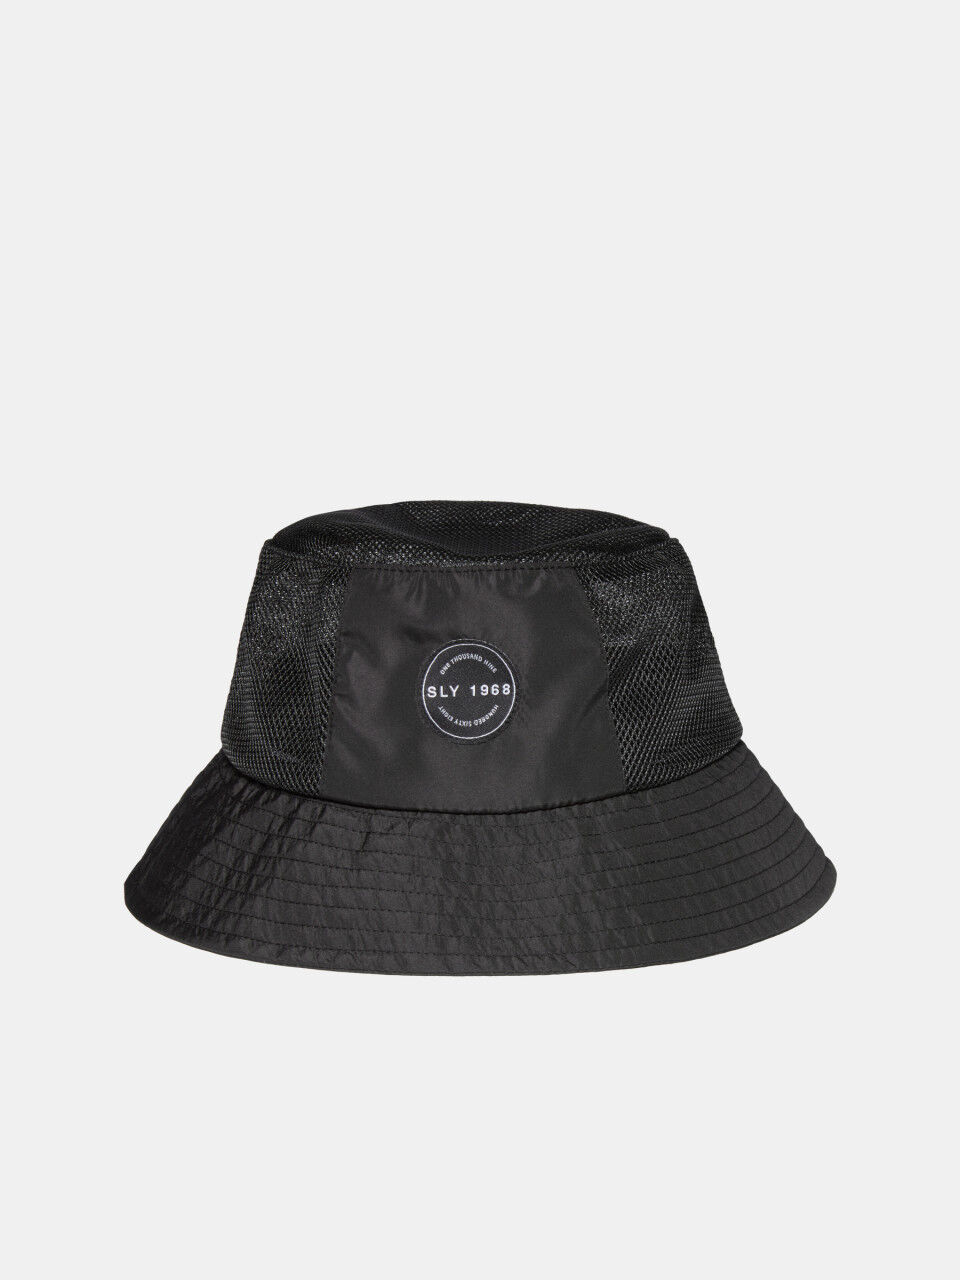 Fisherman's hat with mesh